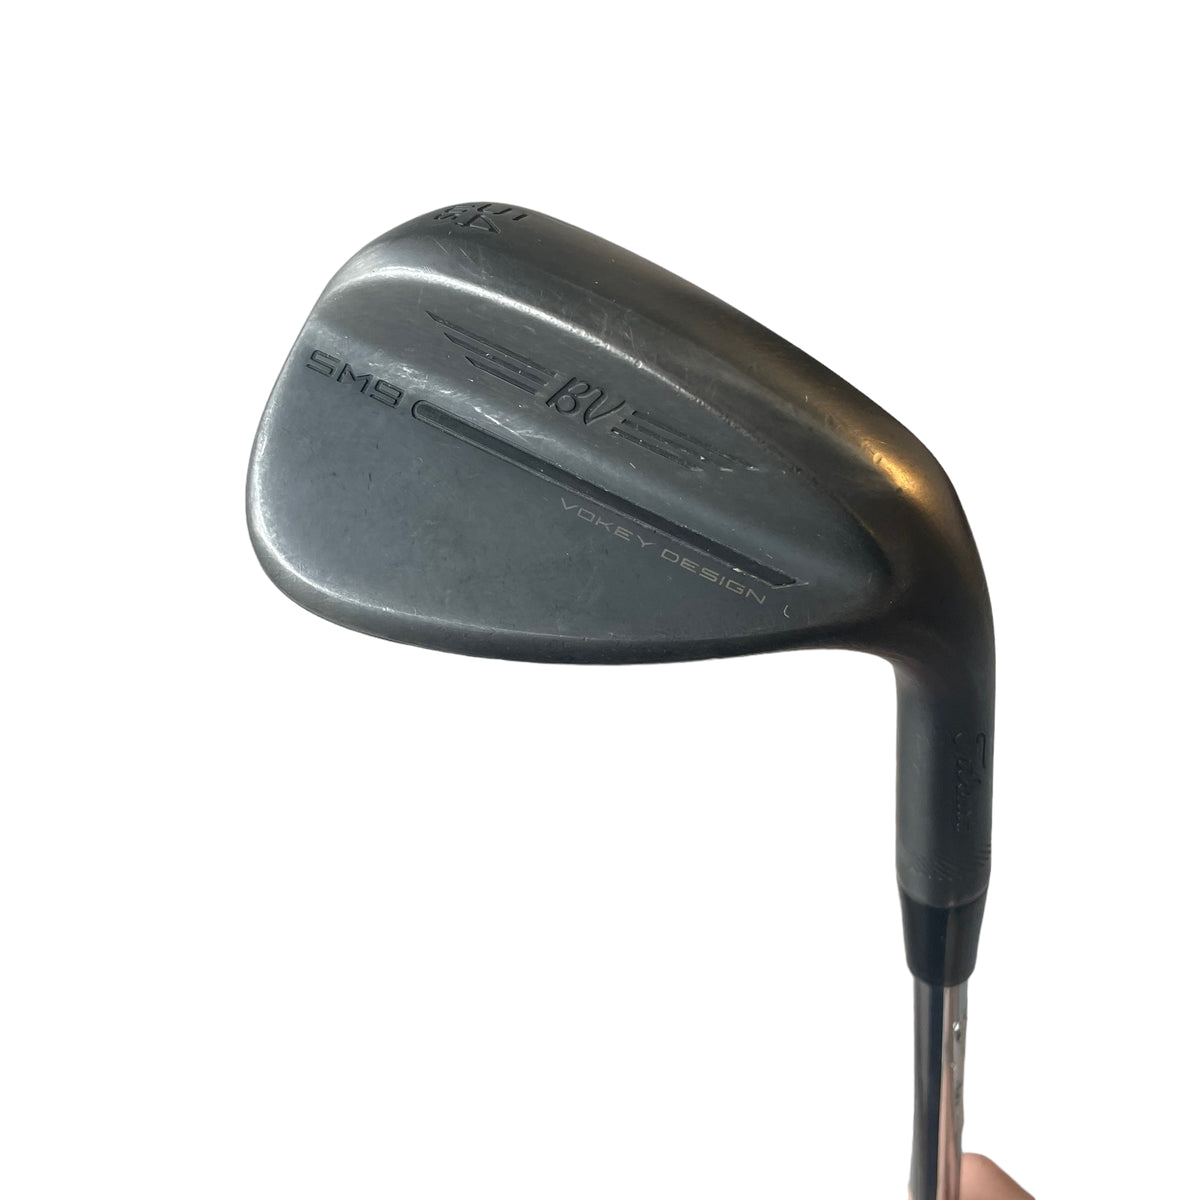 Titleist Vokey SM9 Jet Black Wedge - Used wedge Titleist Right 54.10 S Steel - Project X Rifle 6.5